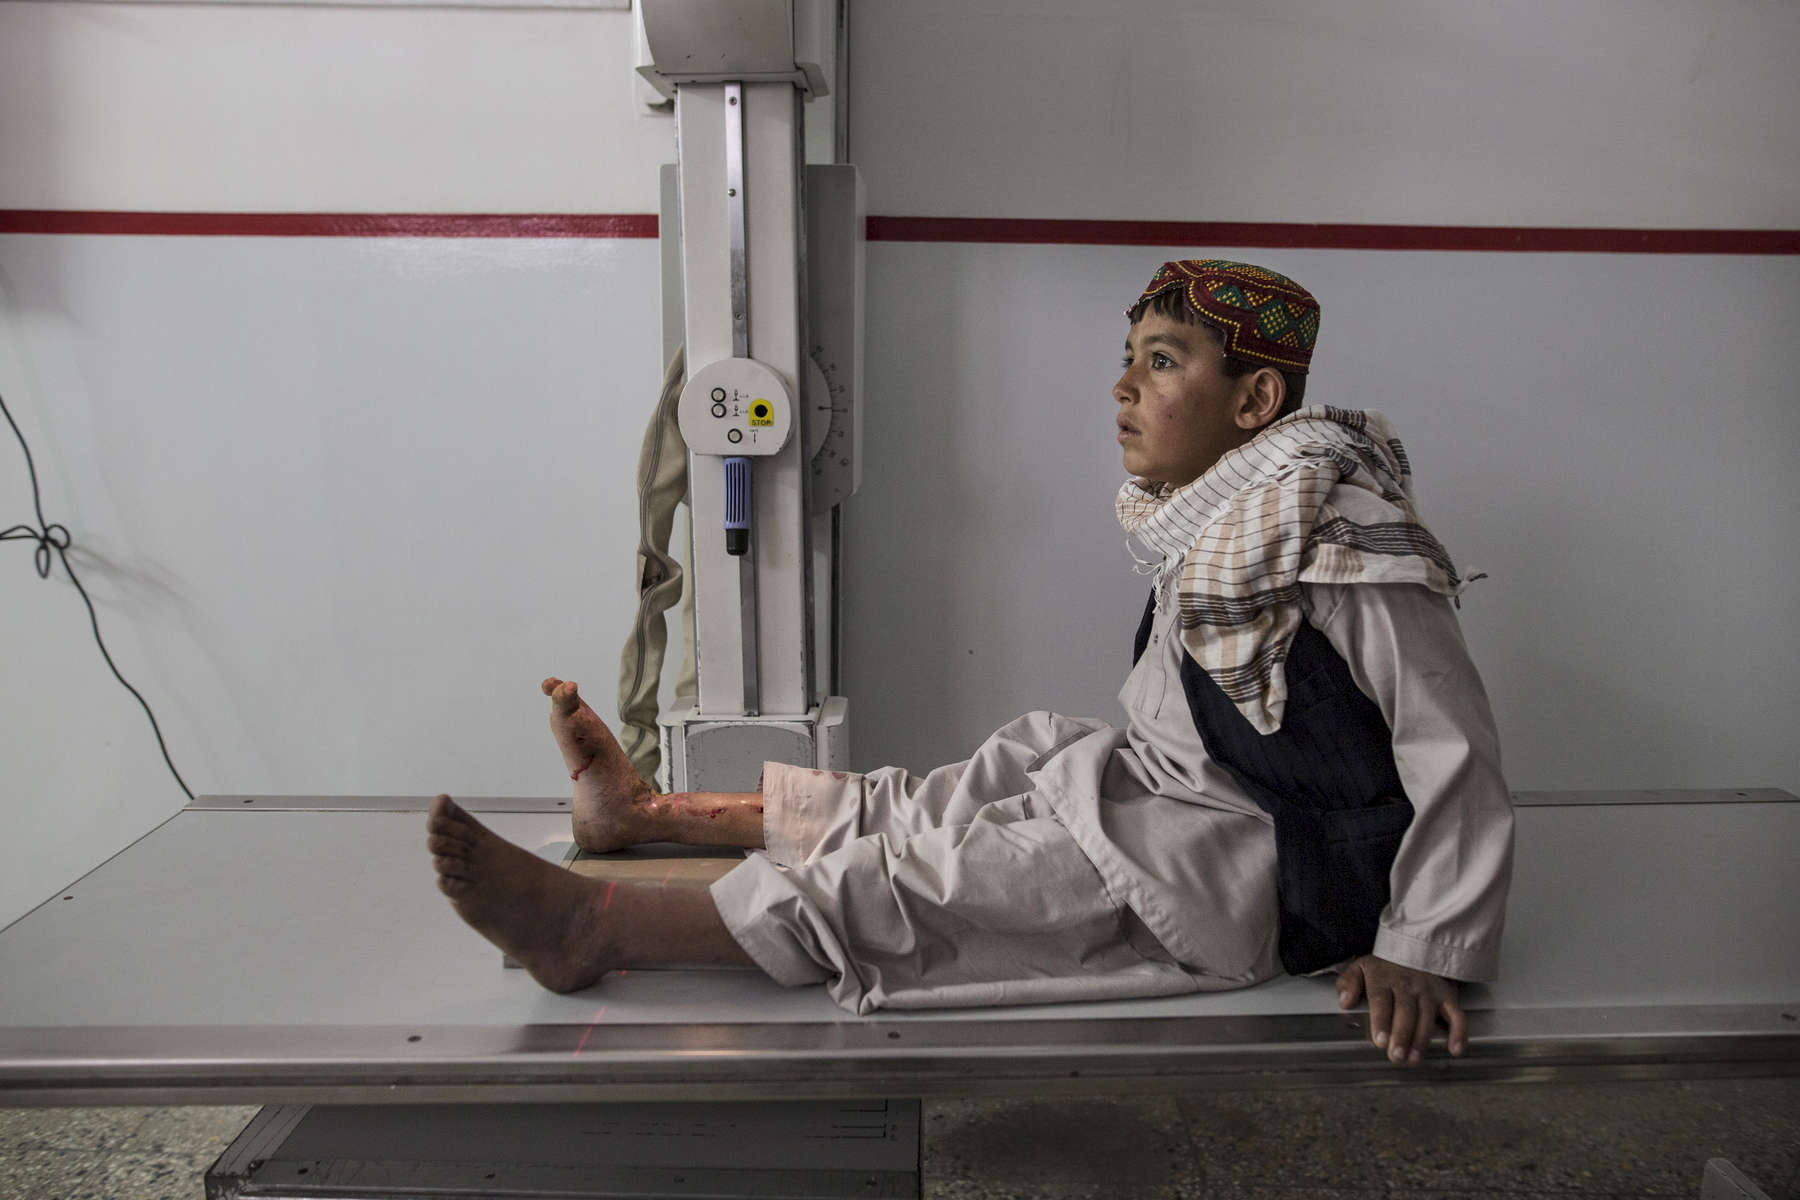 KABUL, AFGHANISTAN -MARCH 29, 2016:  At the Emergency hospital a Pashtun boy waits for an X-ray on his leg from a mine injury in Kabul on March 29, 2016. Every year the UN comes out with their report documenting the unfortunate carnage from America’s longest and most costly war in history. Along with the price tag estimated in the hundreds of billions, the human toll from a 2015 UN Assistance Mission To Afghanistan (UNAMA) report stated the number of Afghan civilians killed and wounded surpassed 11,000.  which was the deadliest on record for civilians in Afghanistan since the US-led invasion more than 14 years ago. 